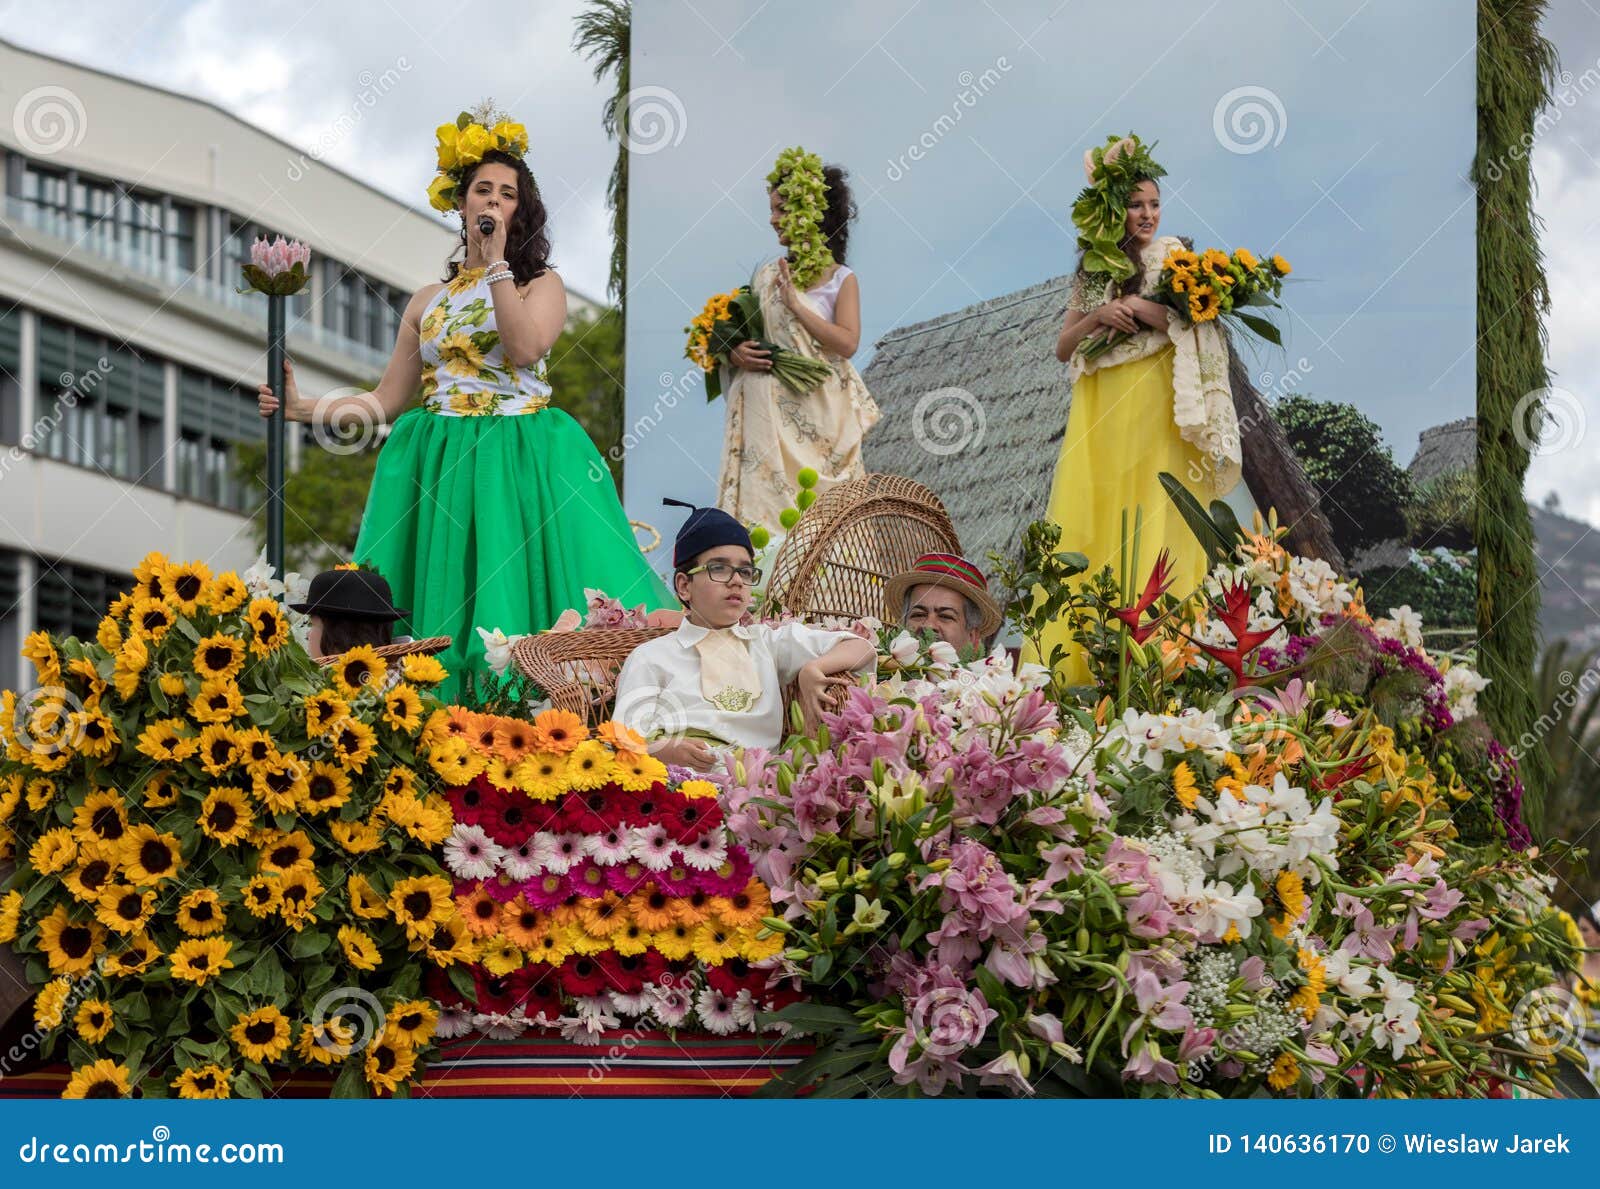 Madeira Flower Festival in the City of Funchal on the Island of Madeira